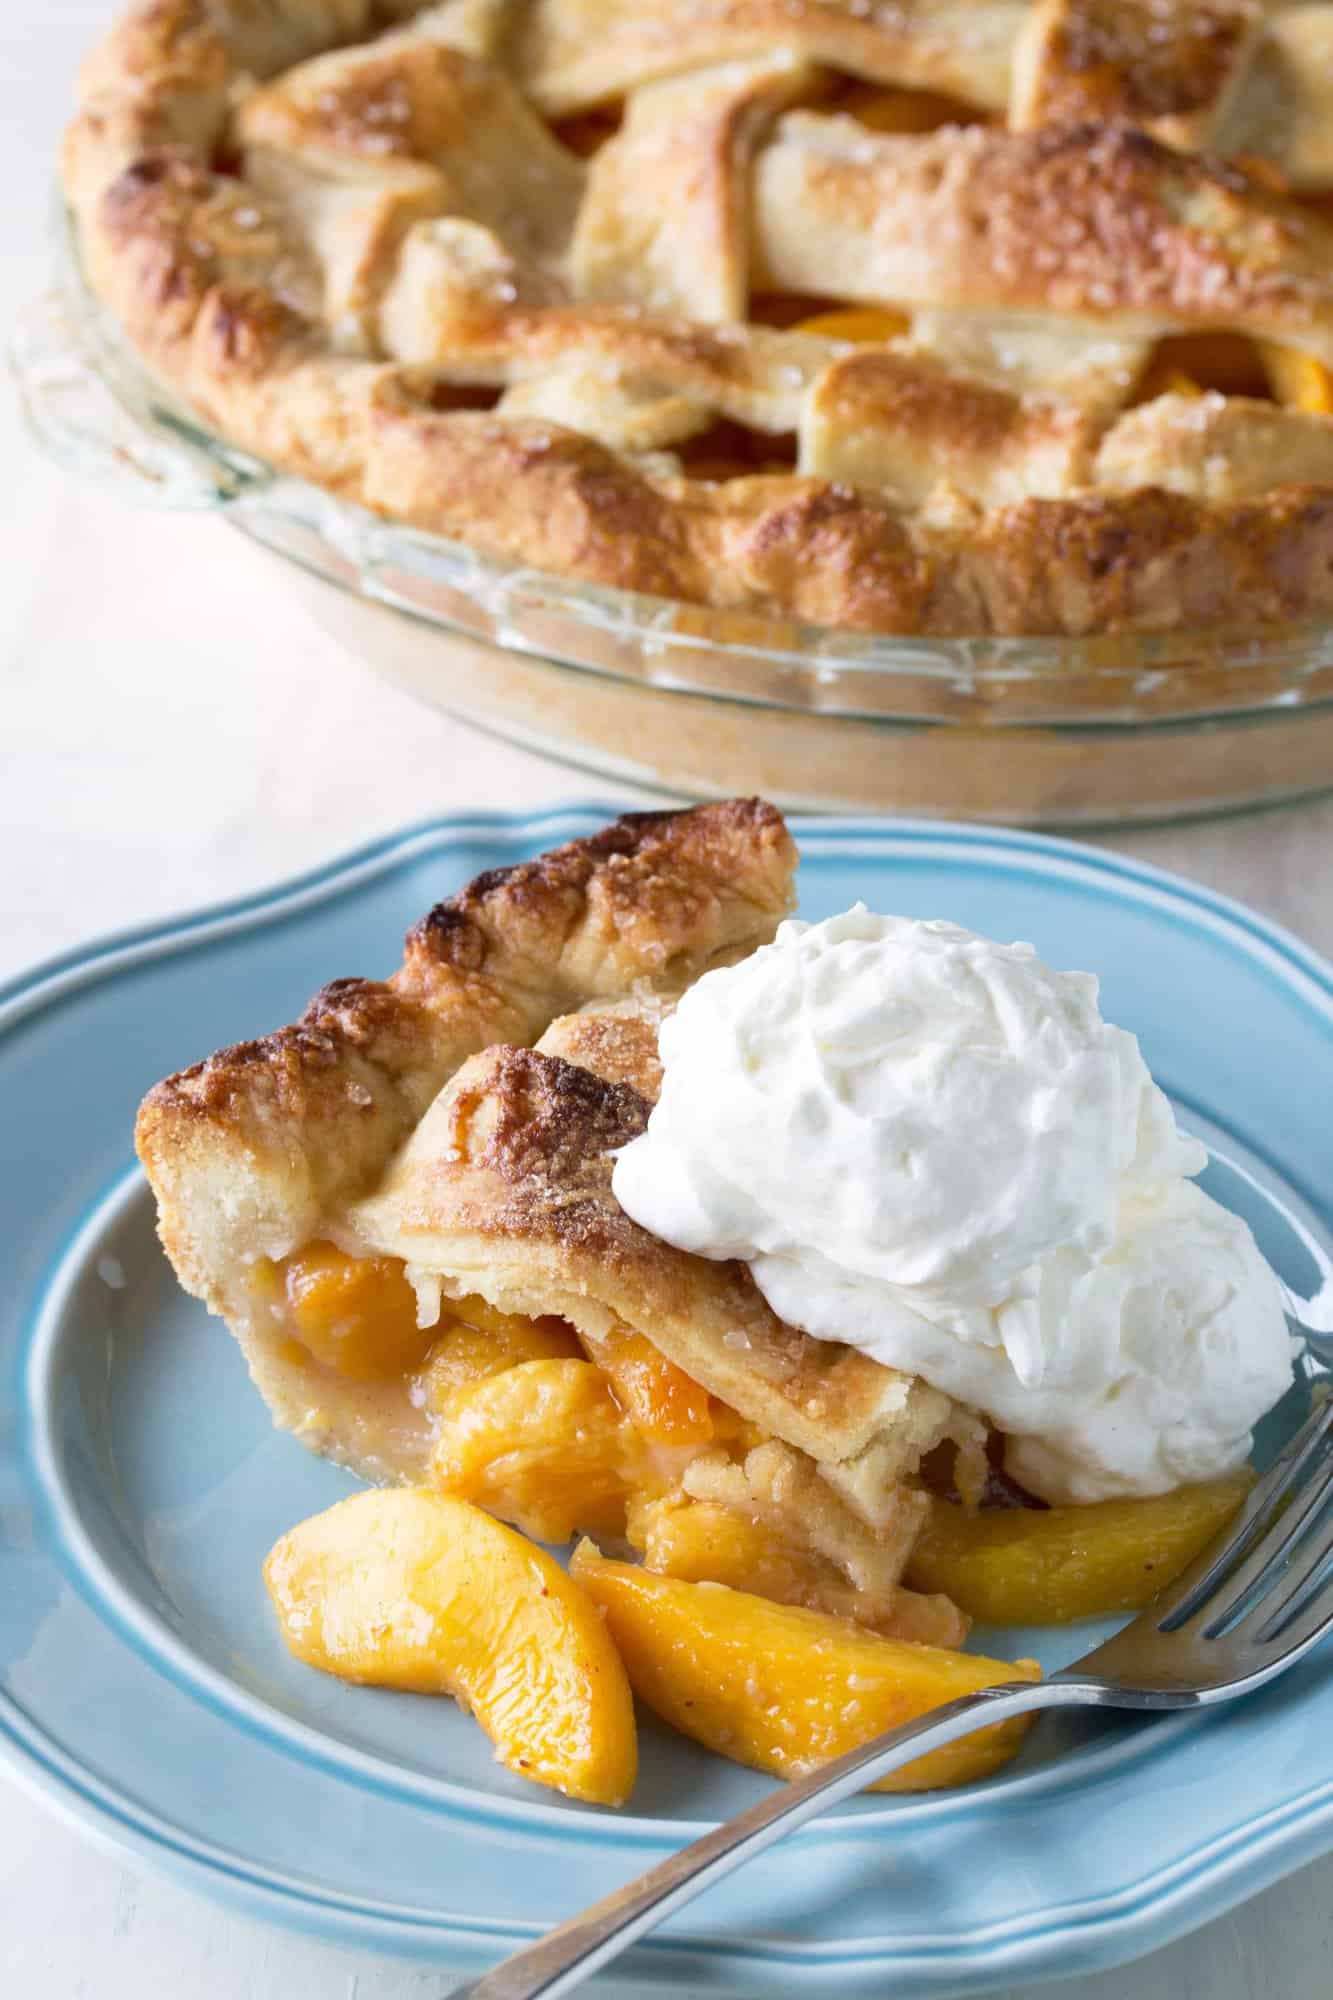 Peach pie served up on a blue plate and topped with a scoop of ice cream.